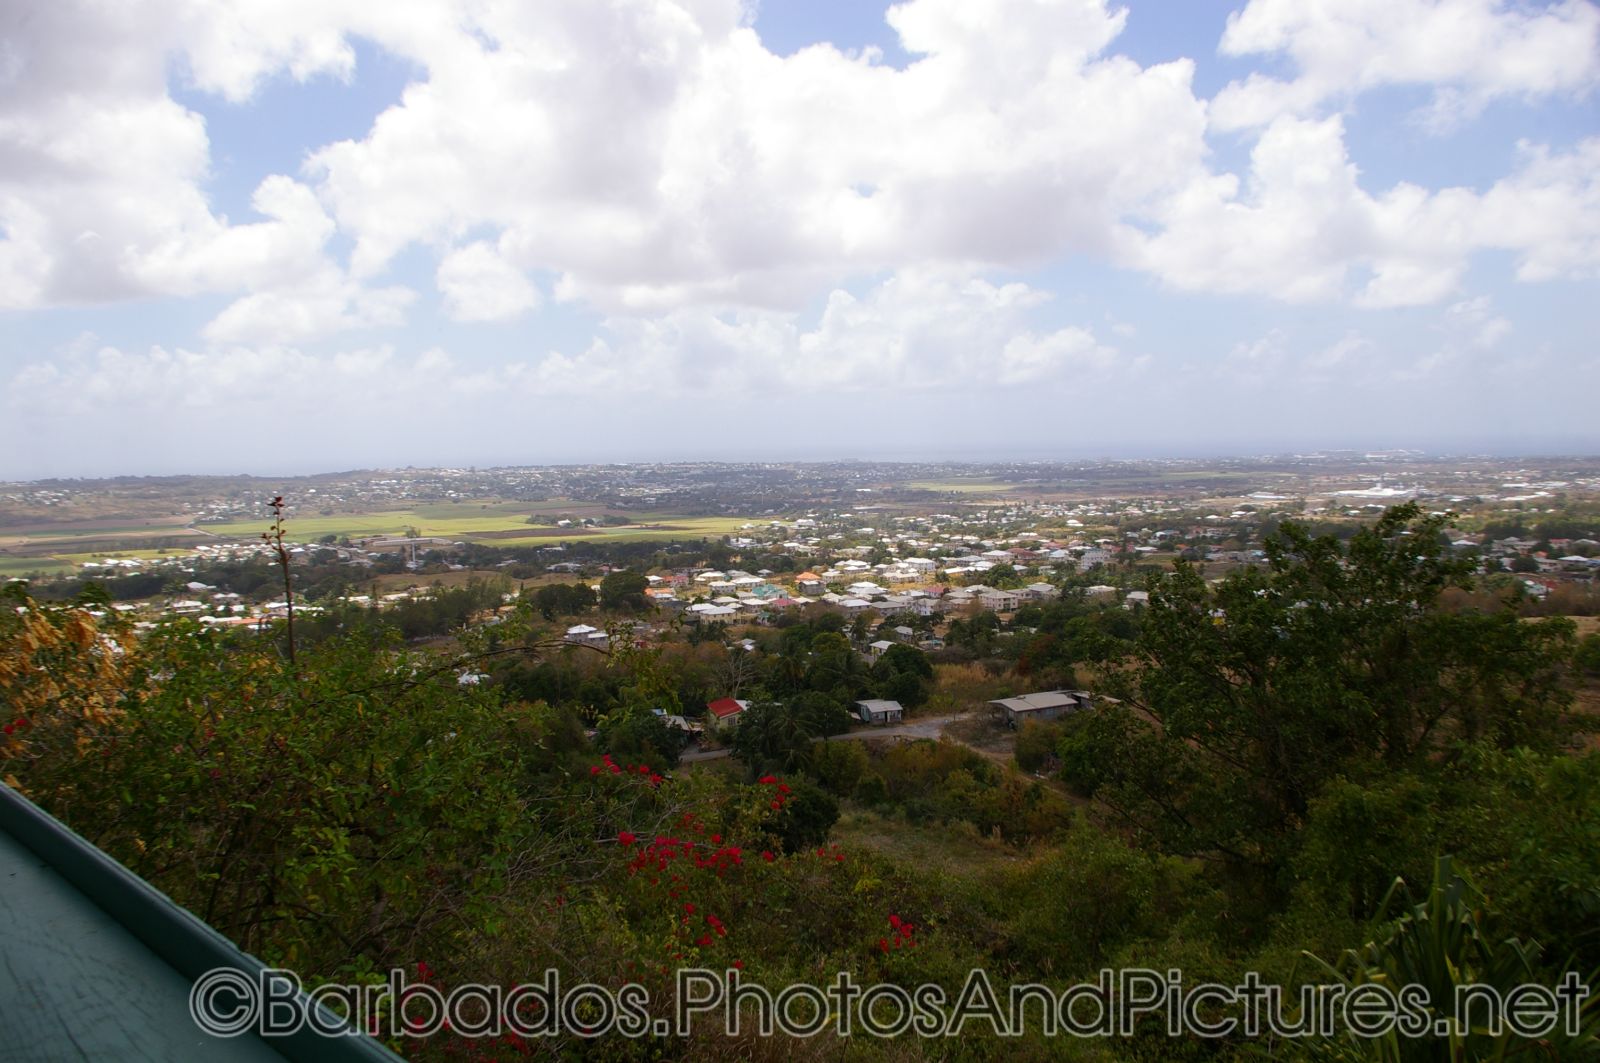 Houses in the distance as viewdd from Gun Hill Signal Station in Barbados.jpg
